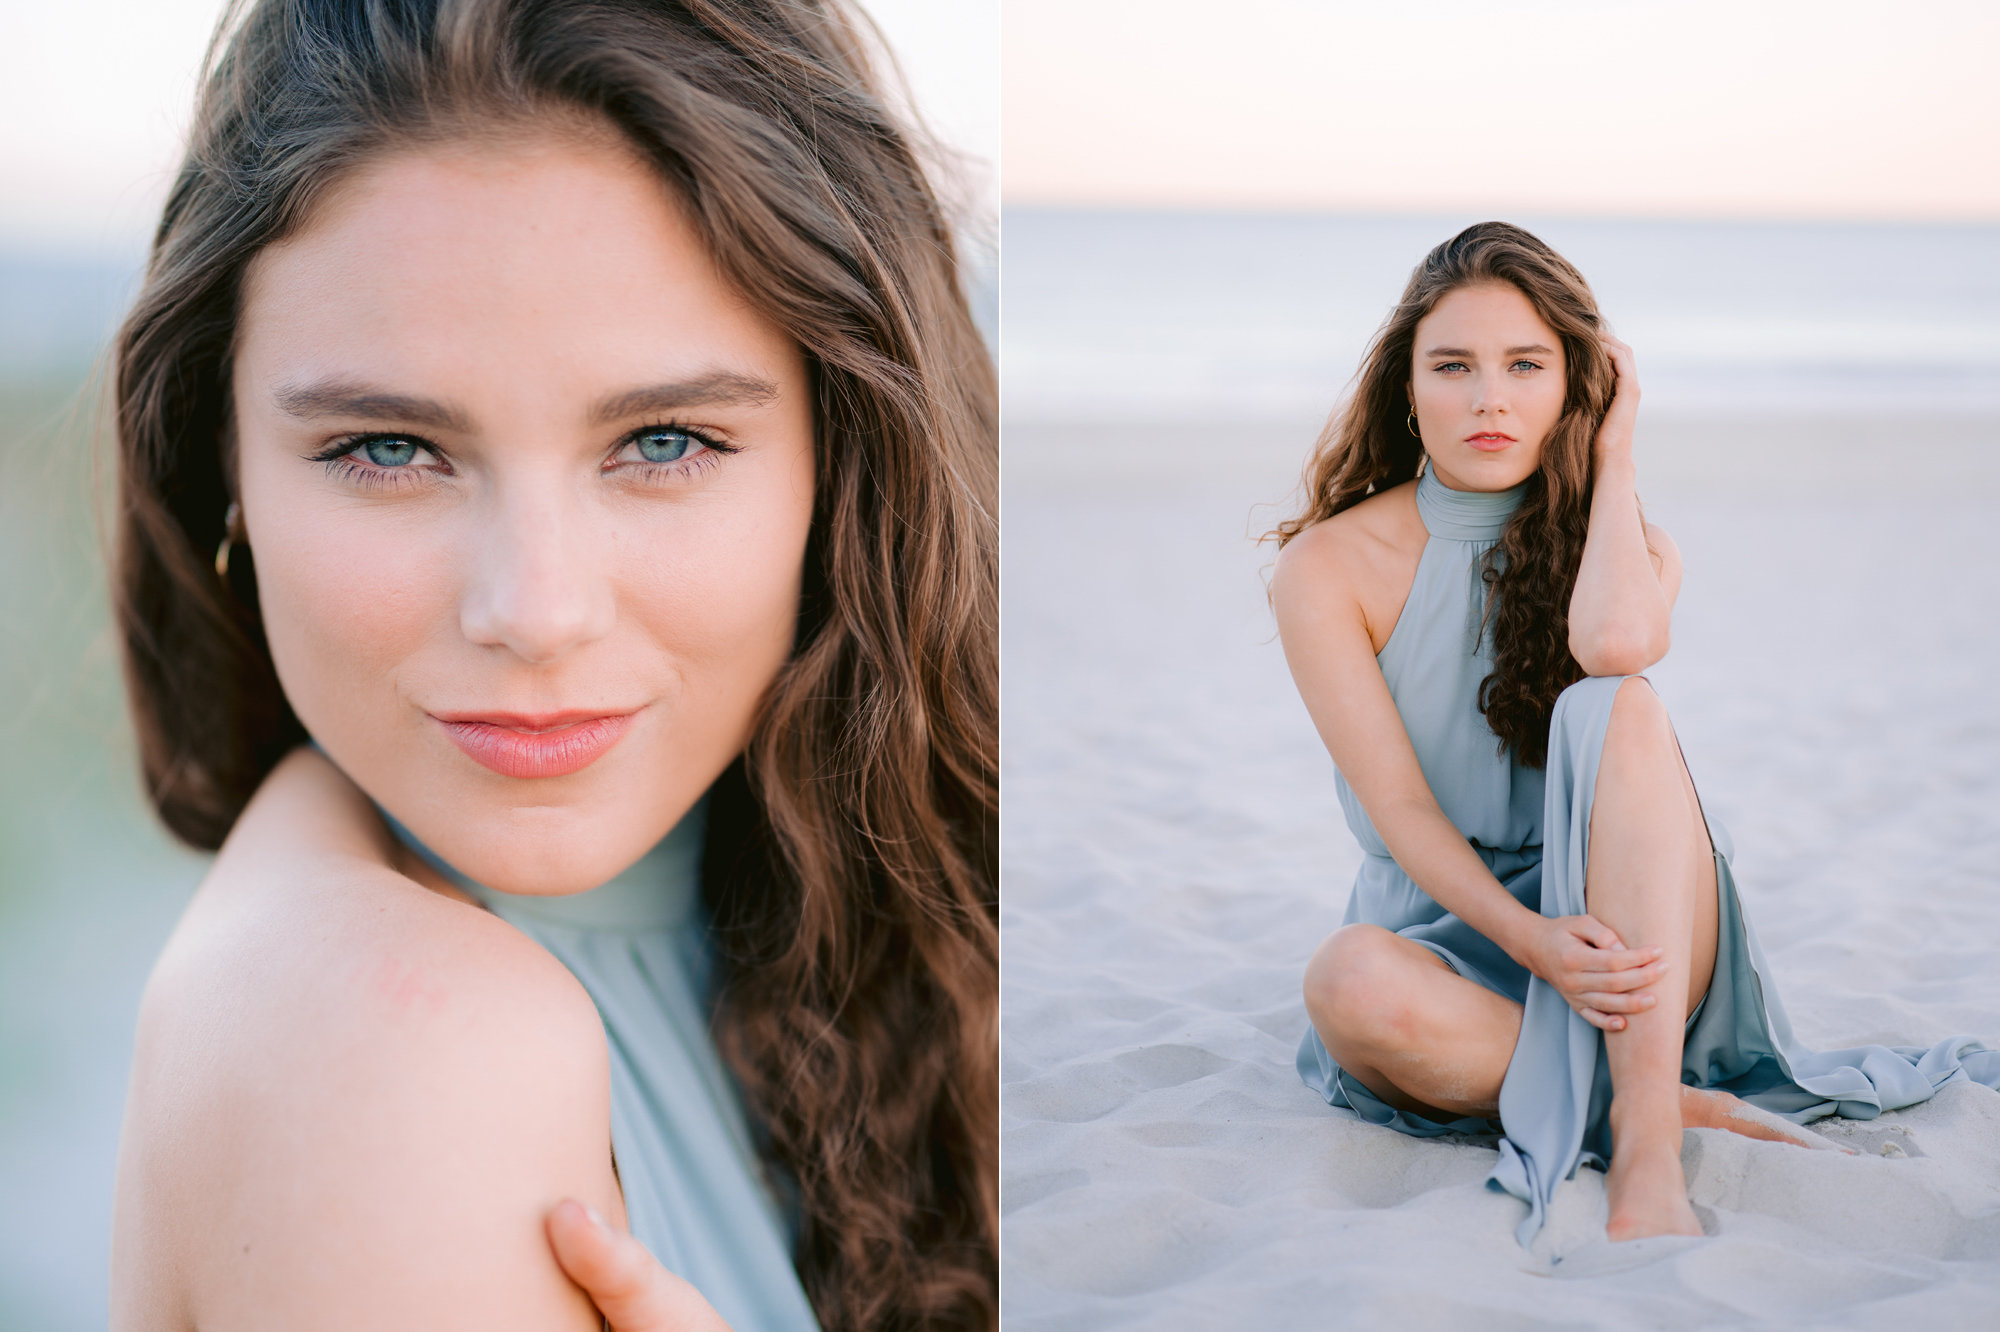 Senior Portraits and Professional Headshots for girls in Myrtle Beach